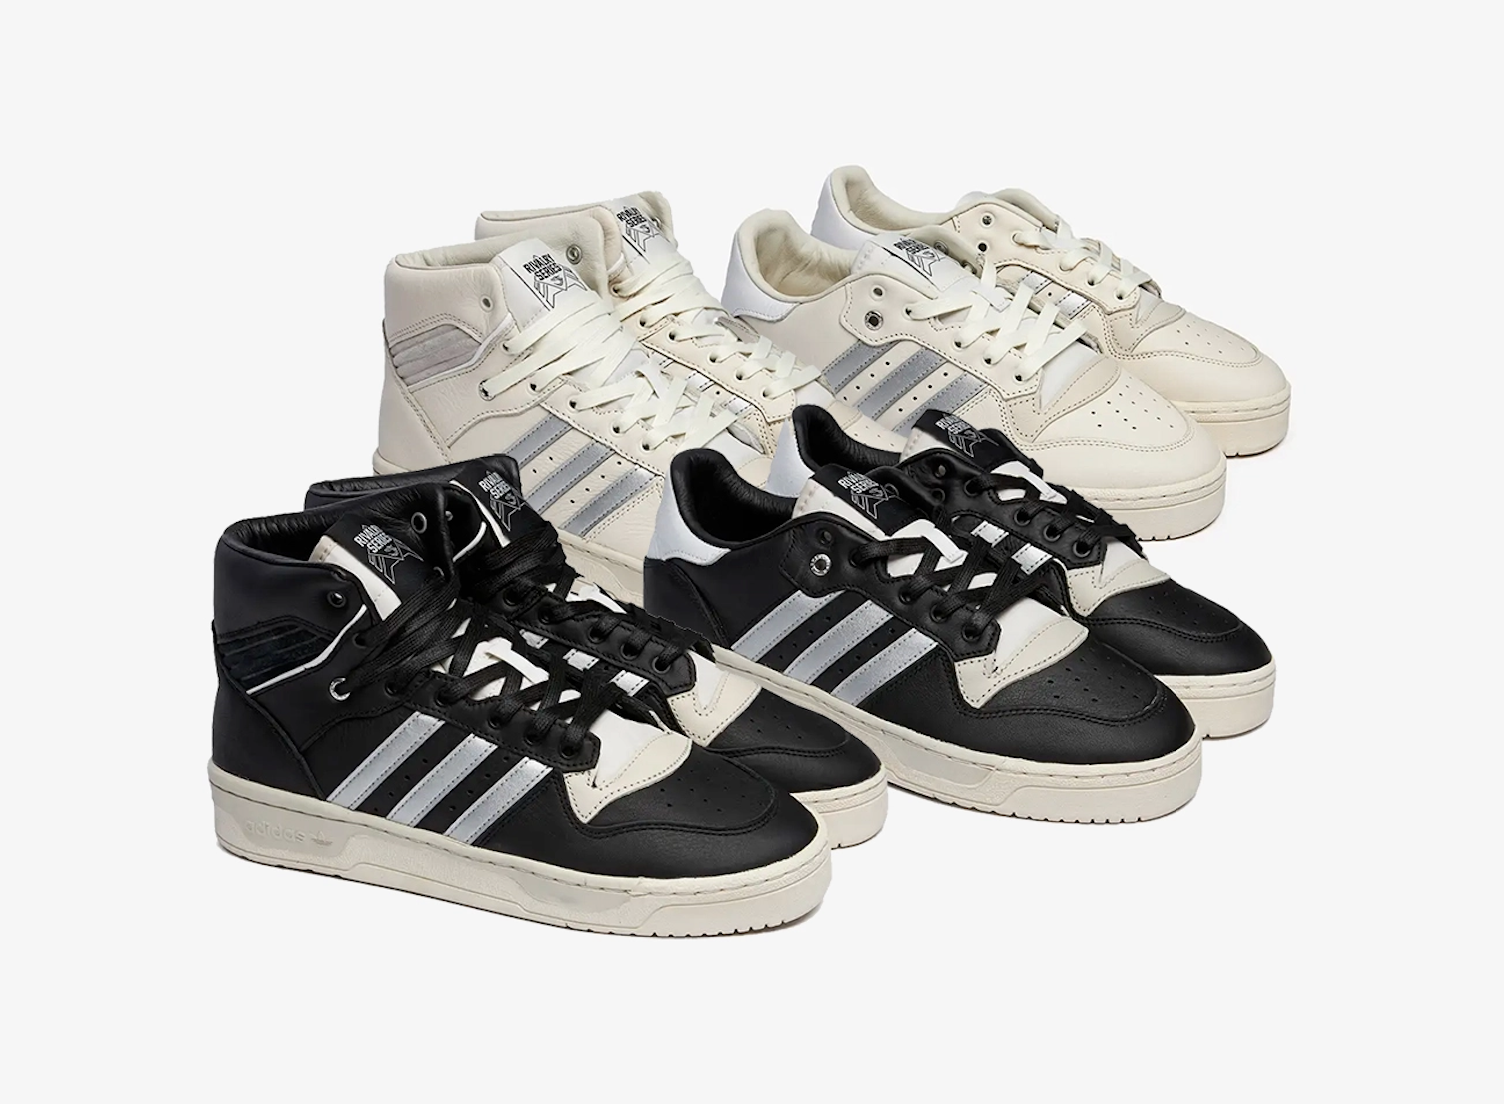 The adidas Consortium Program Gives The adidas Rivalry “Core Black” And “Chalk White” Makeovers